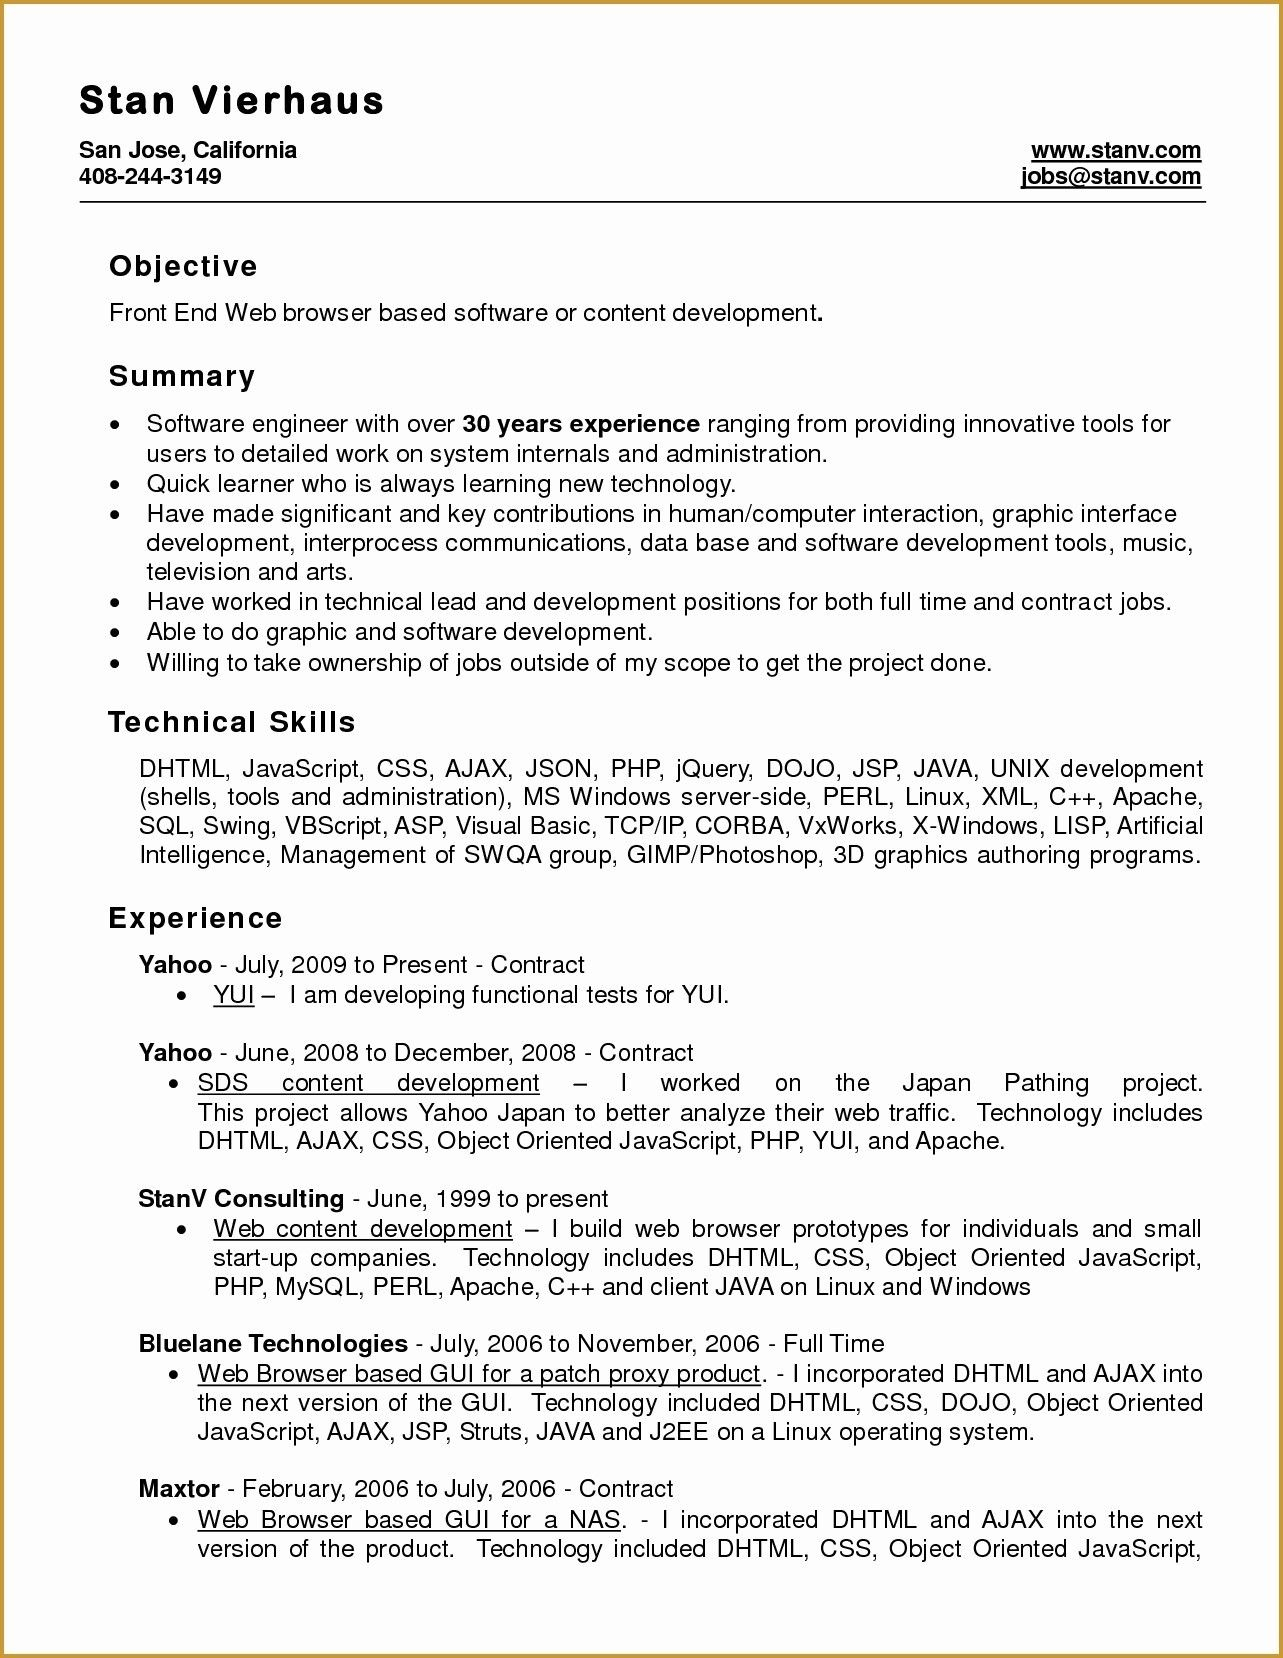 Resume Format Reddit | Teacher Resume Template, Sample Pertaining To How To Make A Cv Template On Microsoft Word